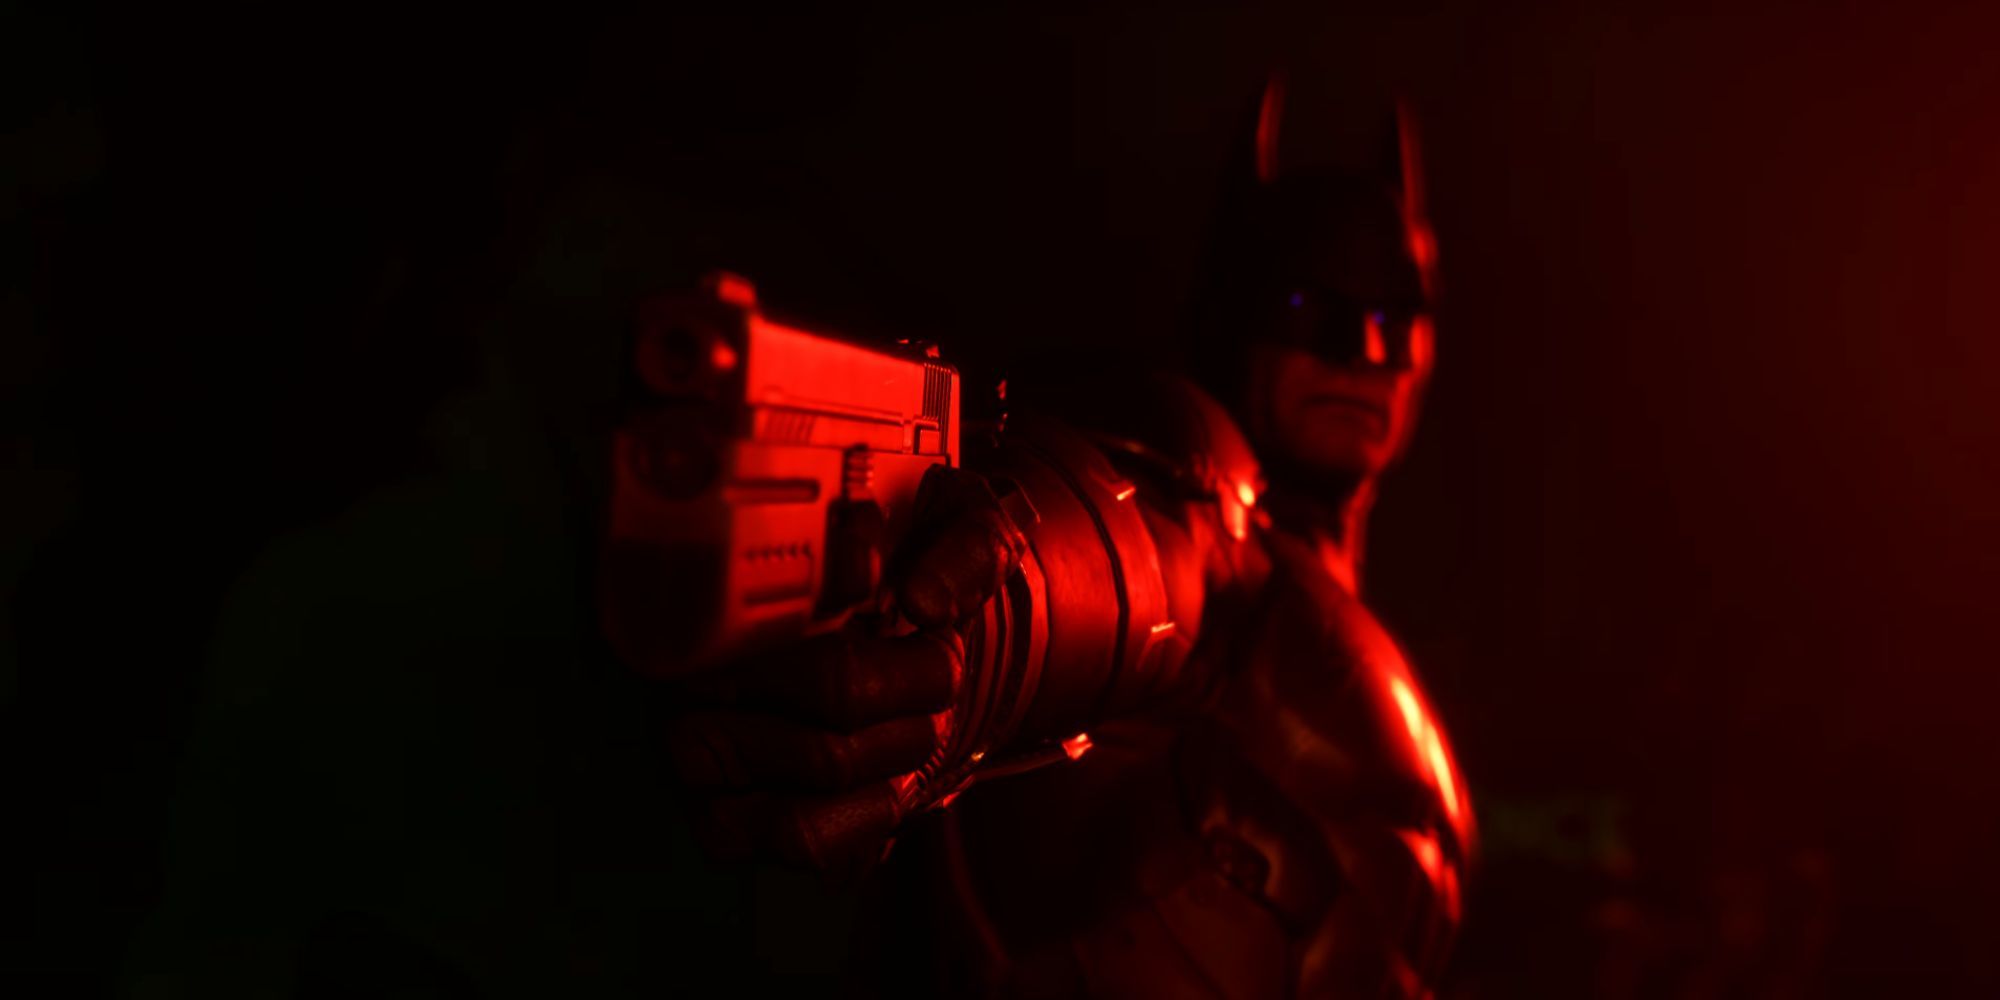 Batman holding a gun in Suicide Squad: Kill the Justice League in red lighting.